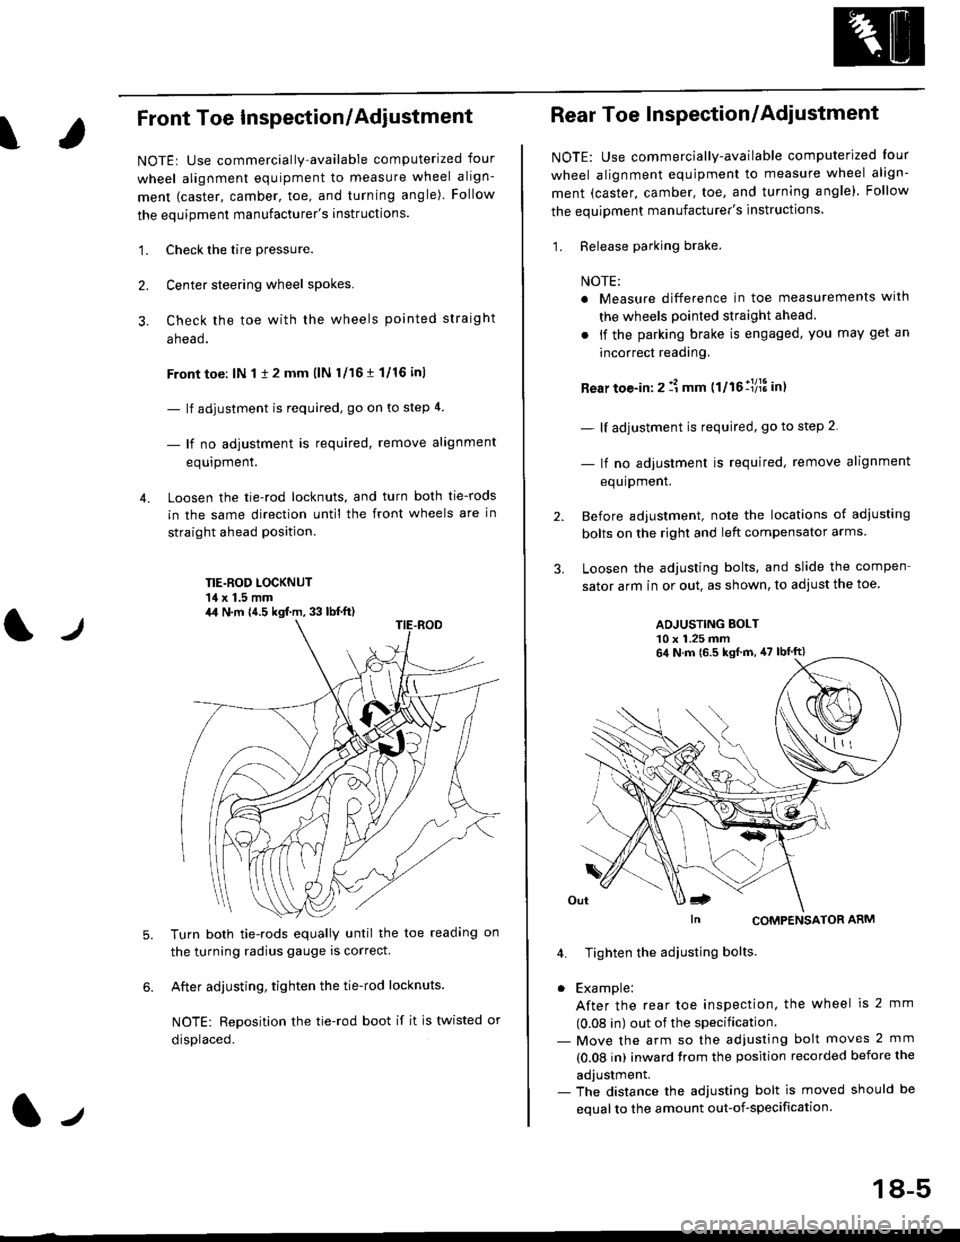 HONDA CIVIC 1996 6.G Owners Guide ?
Front Toe Inspection/Adiustment
NOTE: Use commercially-available computerized four
wheel alignment equipment to measure wheel align-
ment (caster, camber, toe, and turning angle). Follow
the equipme